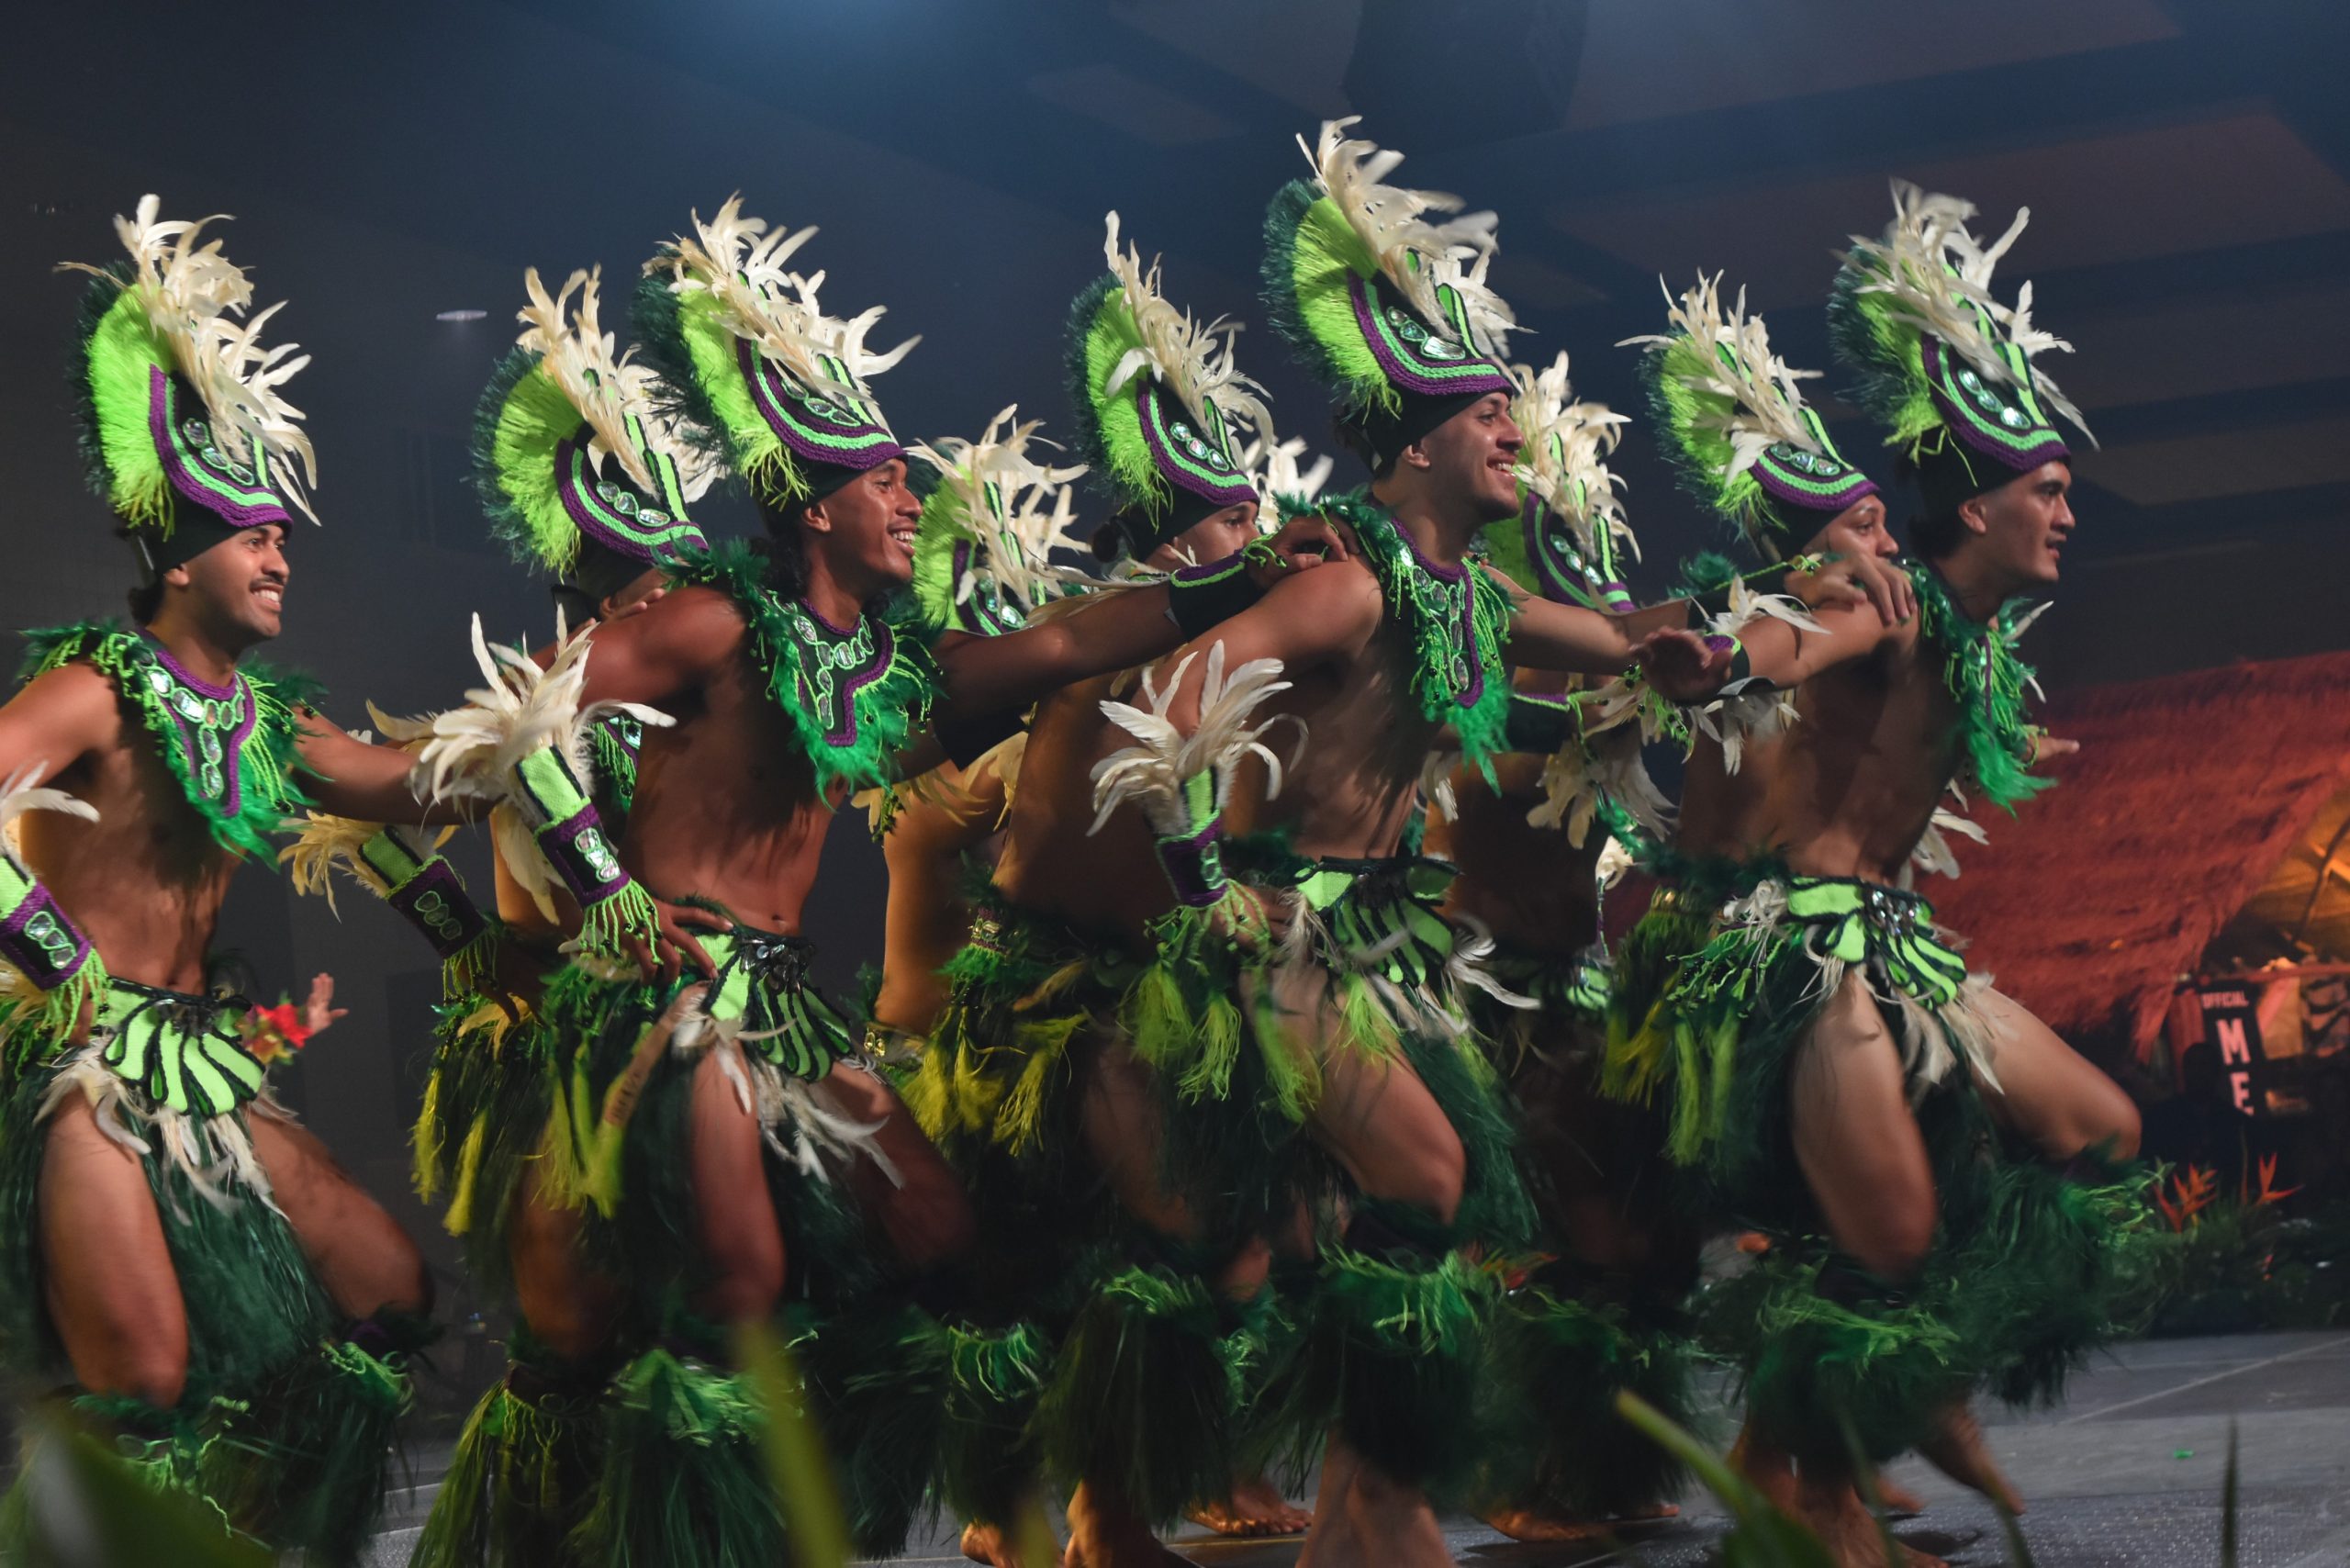 ‘We heard the call, we came’: Cook Islands delegation electrifies audience at FestPAC